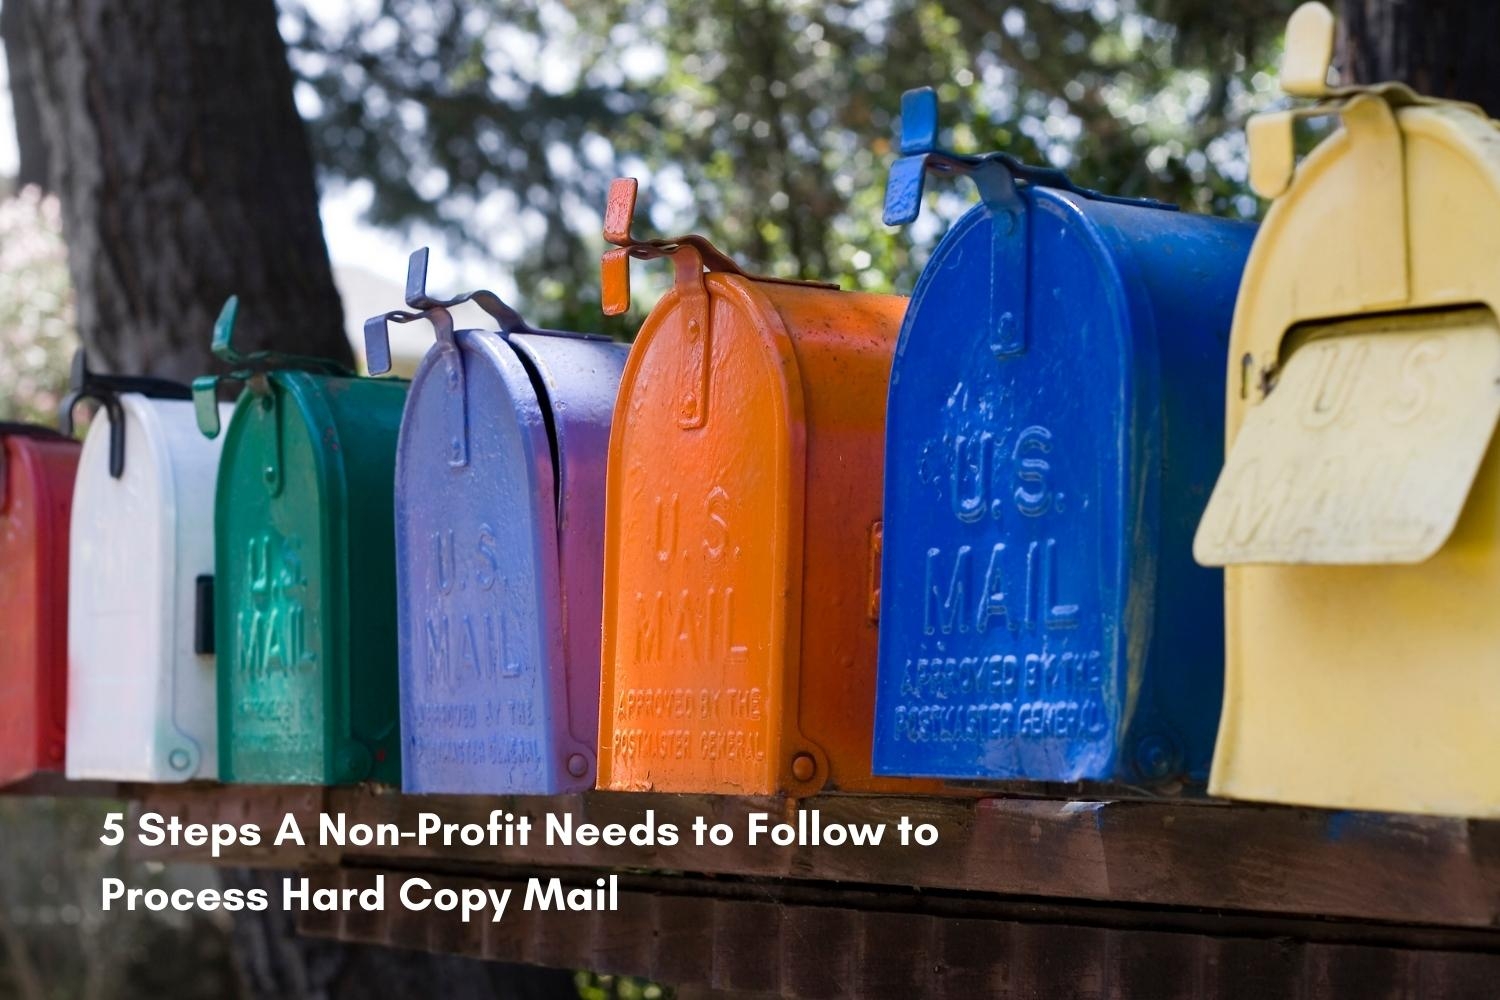 Learn to Process Hard Copy Mail Efficiently 